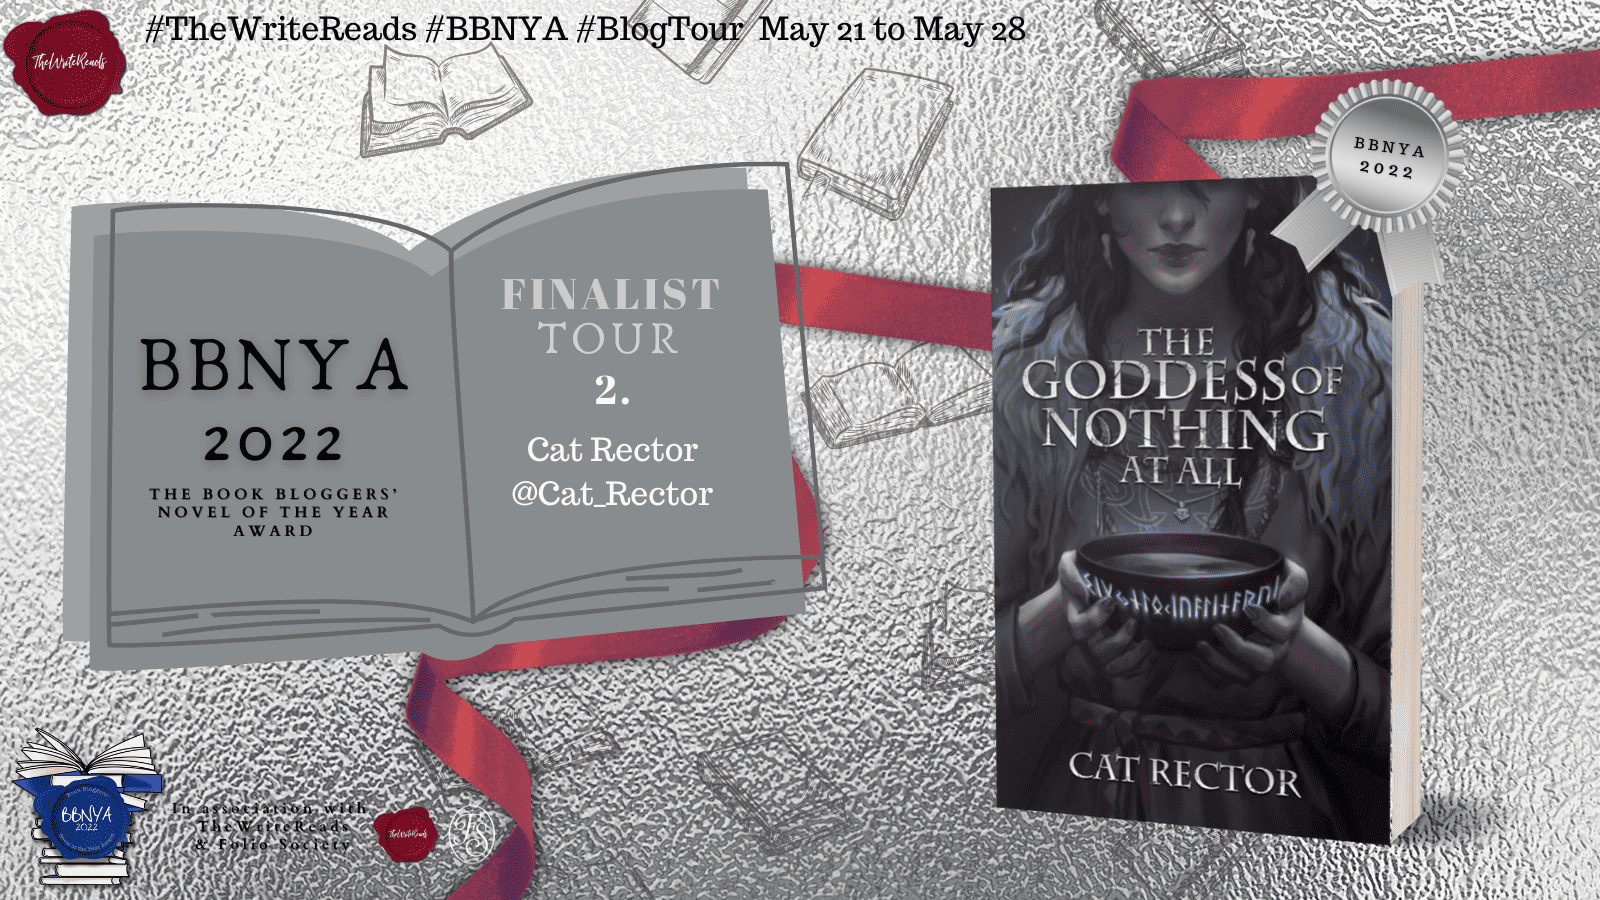 2022 BBNYA Winner's Tour: #2 | The Goddess of Nothing at All (Unwritten Runes Duology Book 1) by Cat Rector